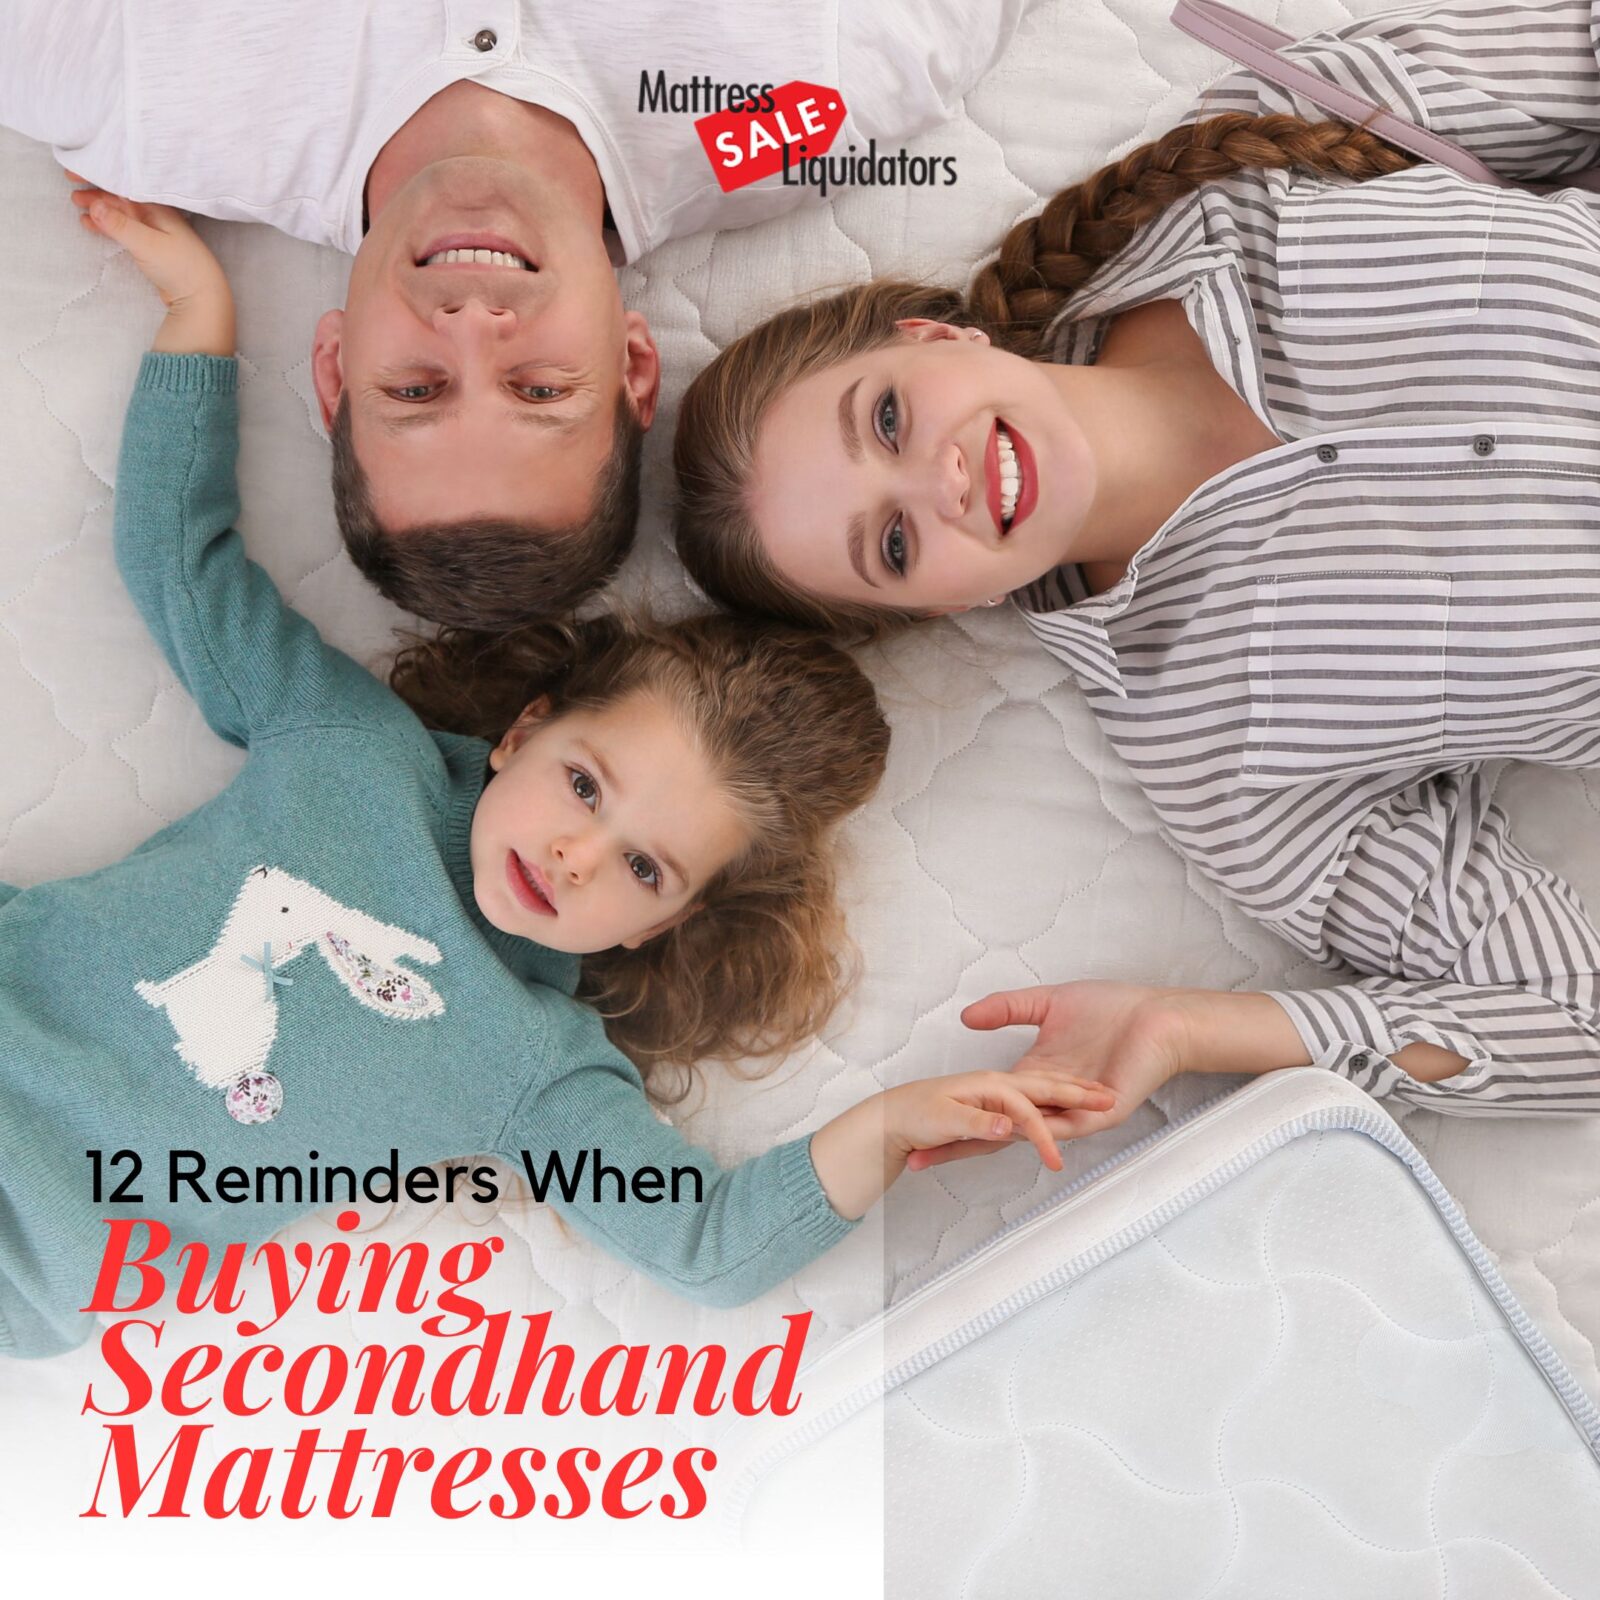 family-testing-a-mattress-blog-title-12-Reminders-When-Buying-Secondhand-Mattresses-Instagram-Post